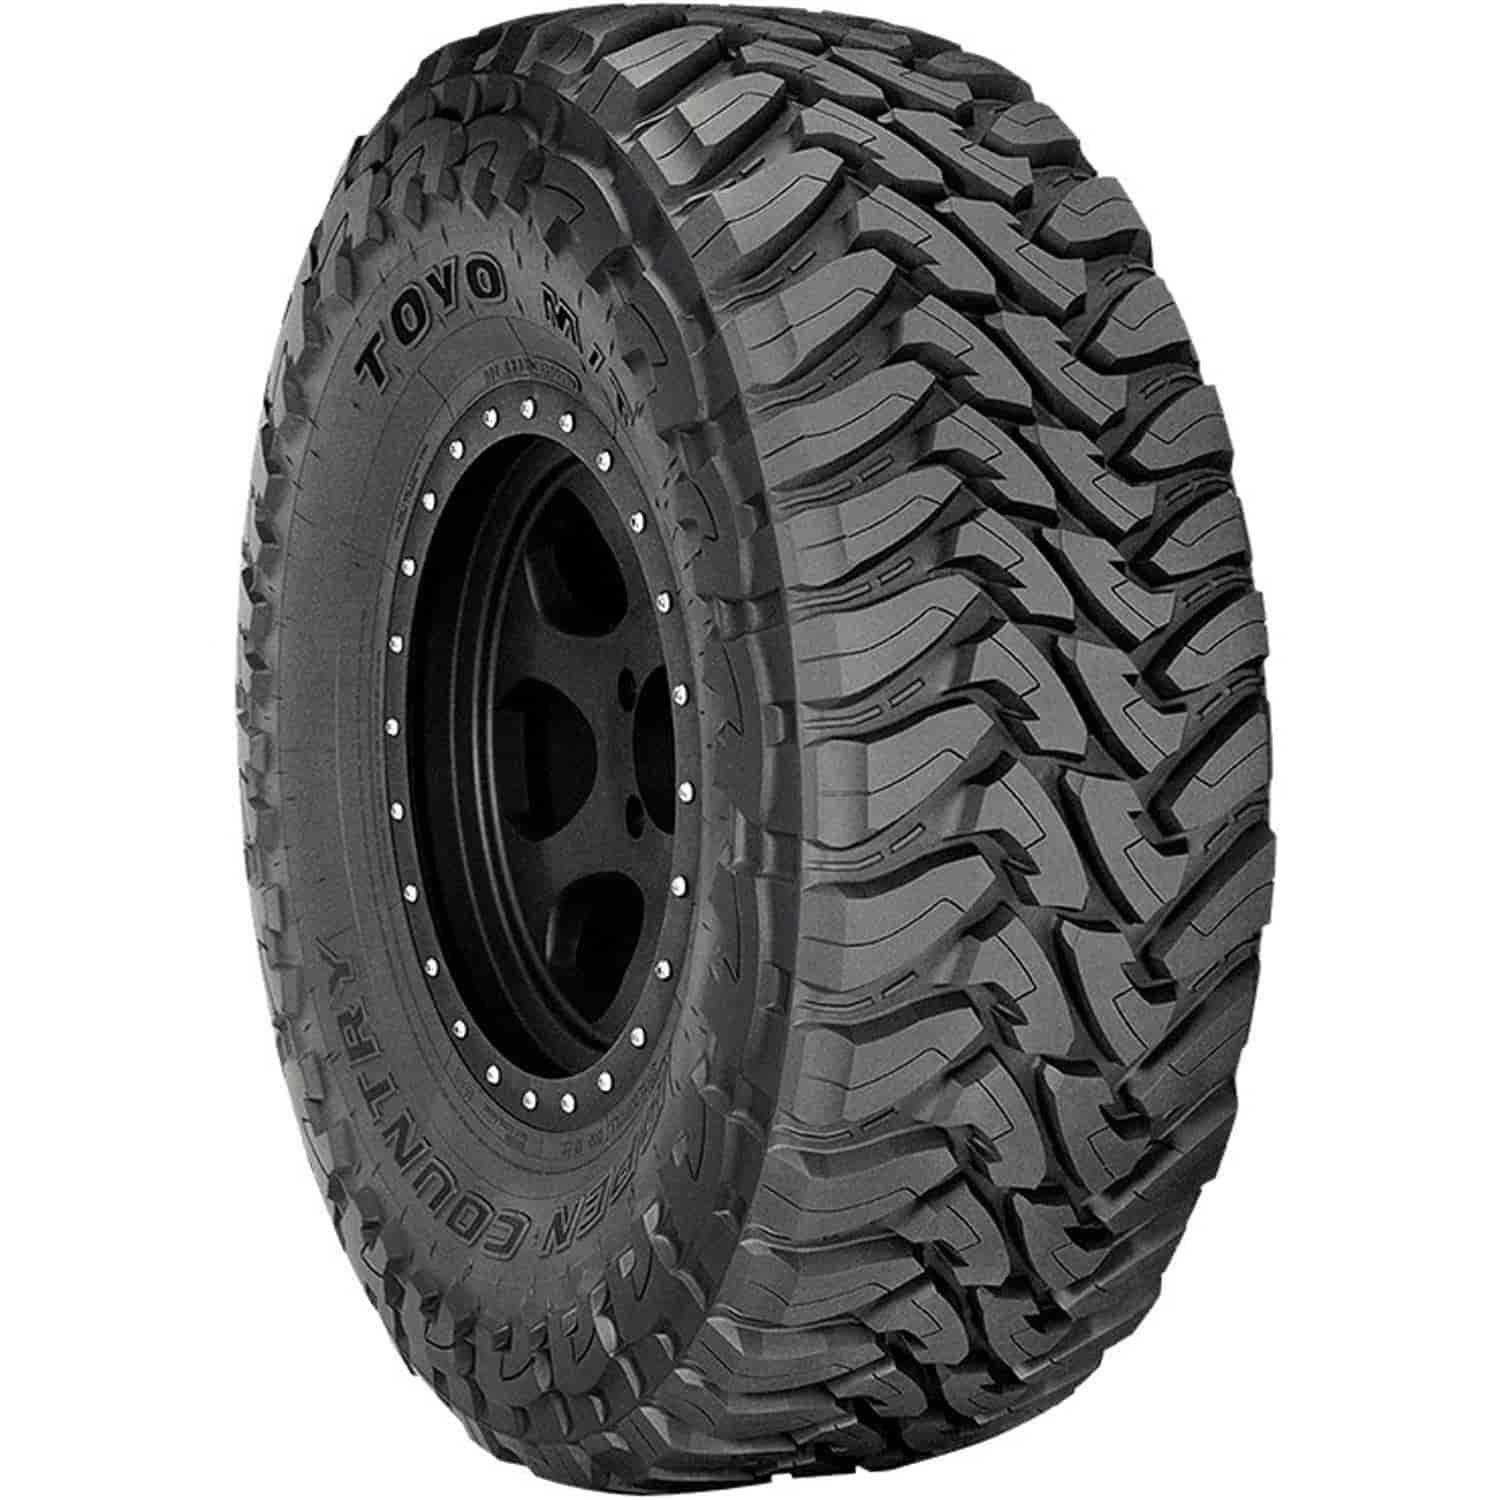 Open Country M/T LT275/70R18 125P E/10 33X11.00R18